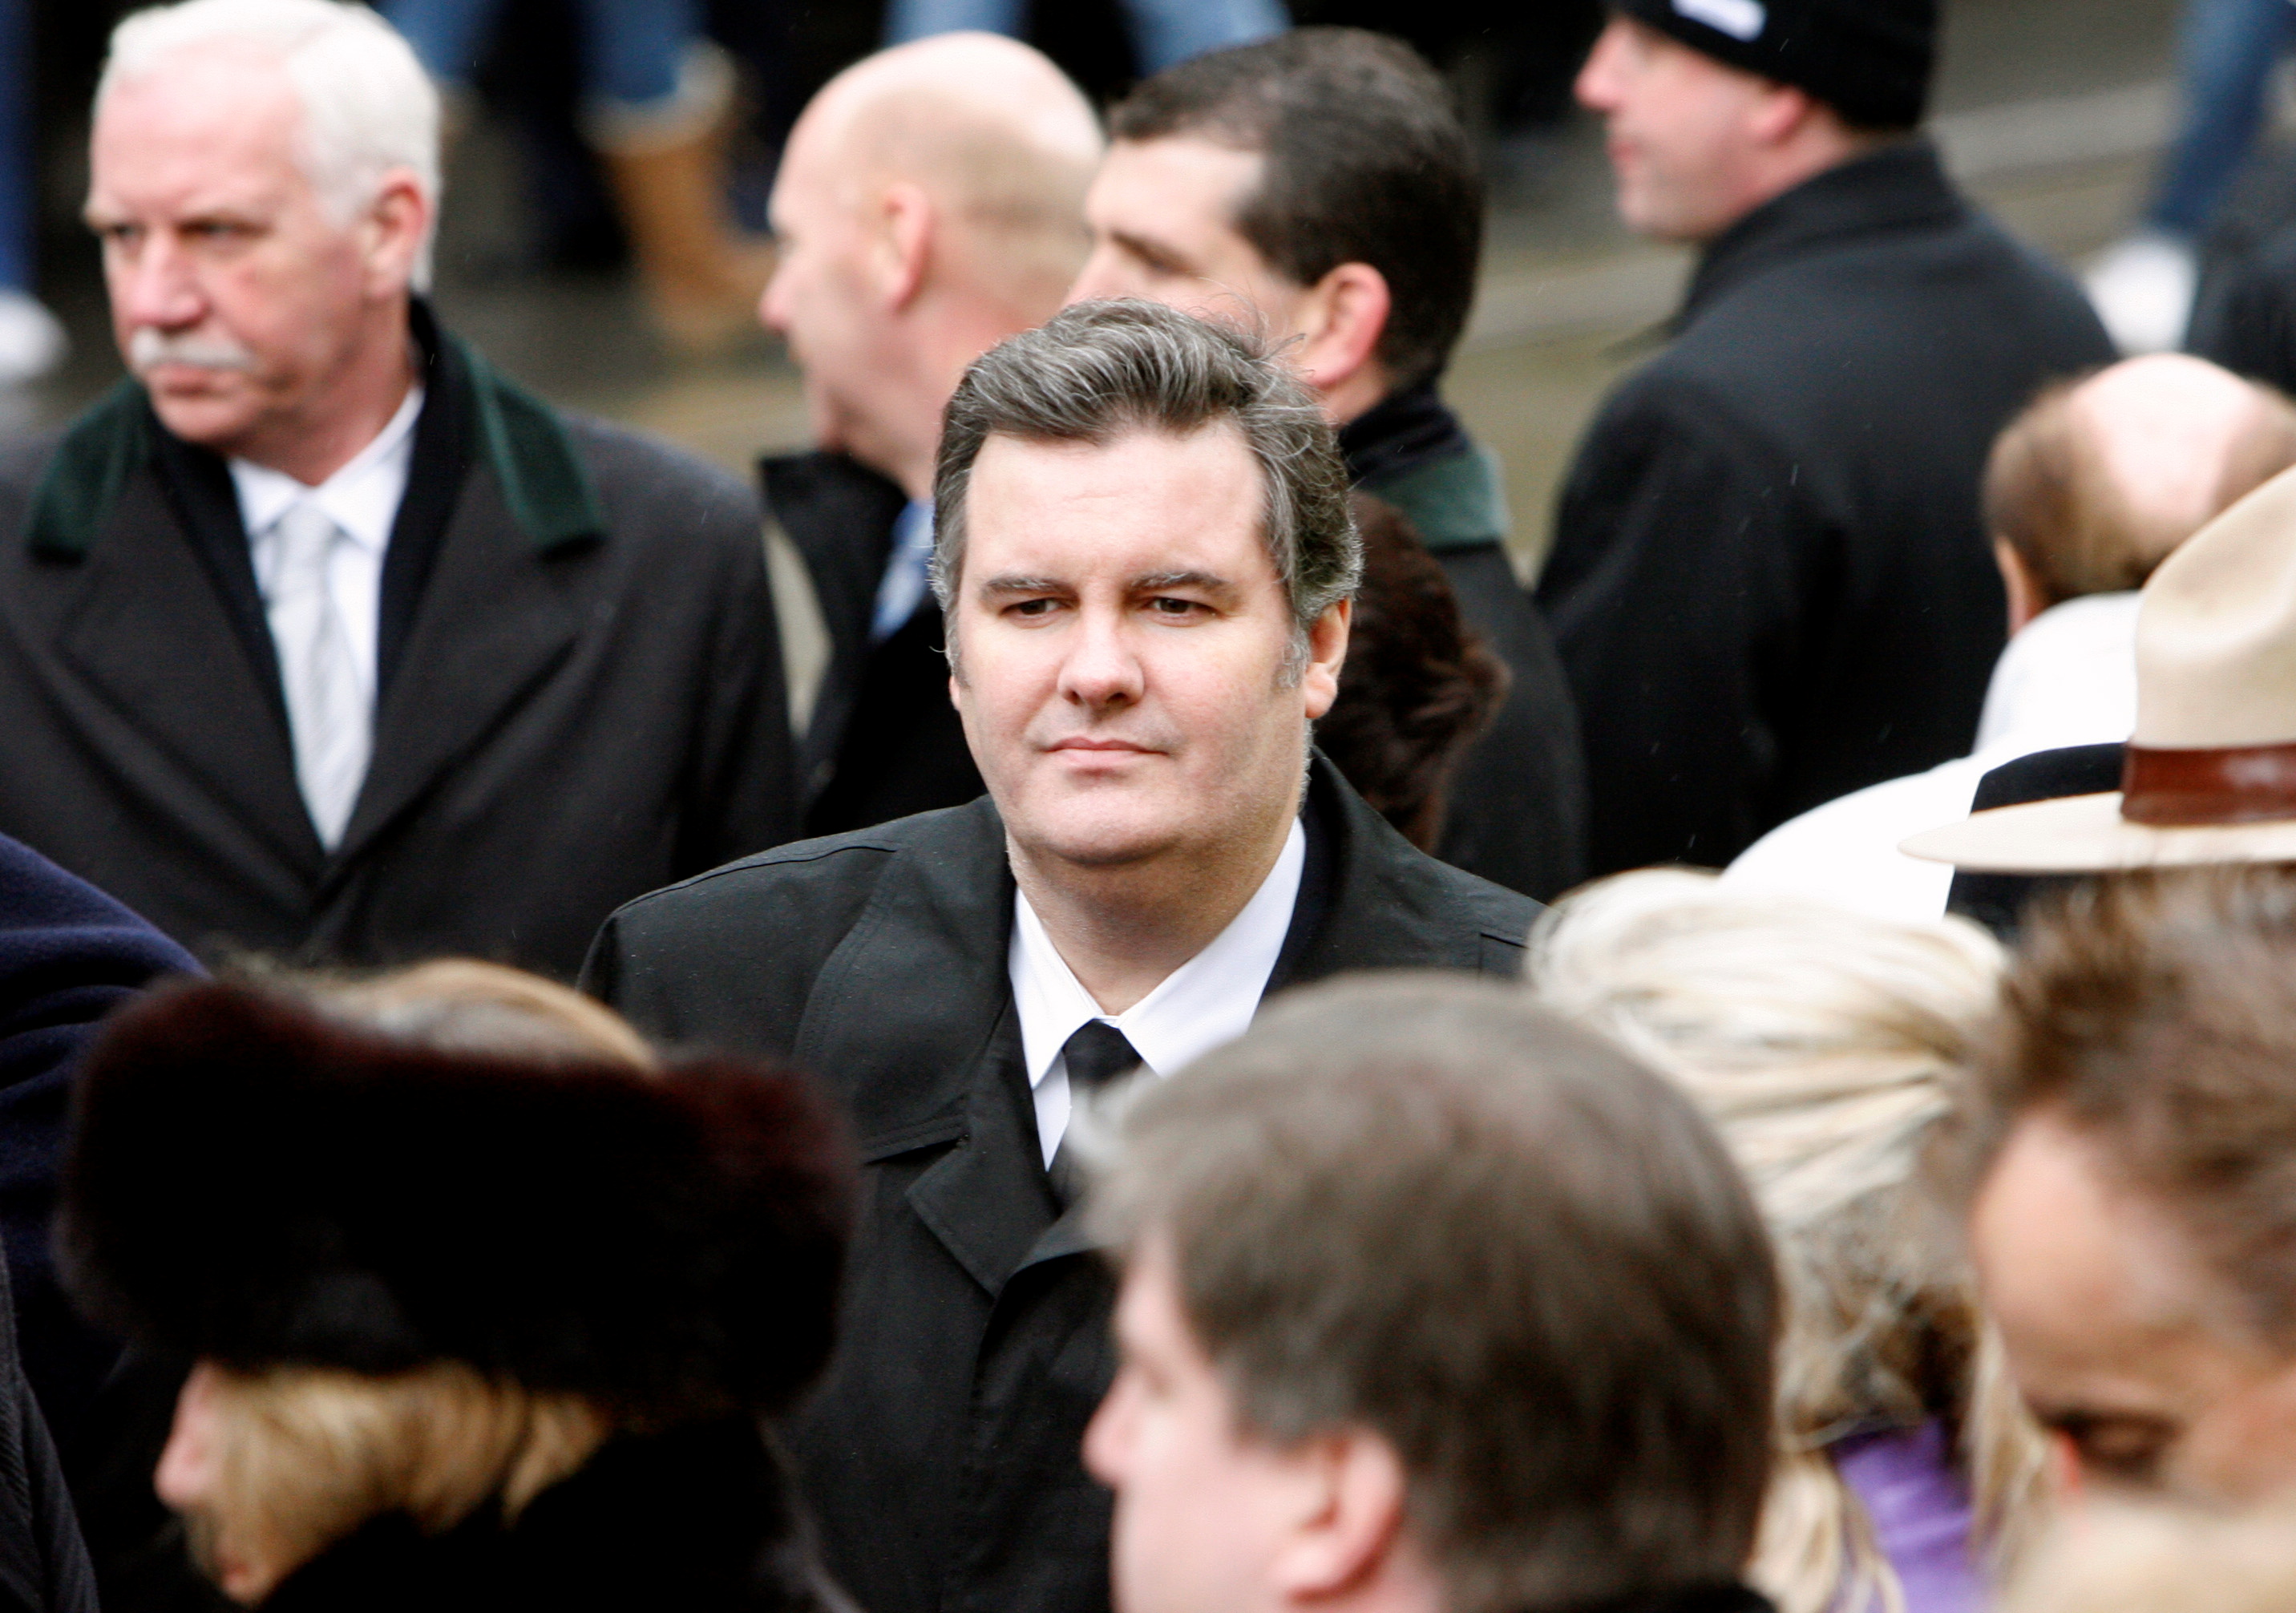 Edward Rogers stands with mourners at the funeral for his father Ted Rogers, president and CEO of Rogers Communications, in Toronto